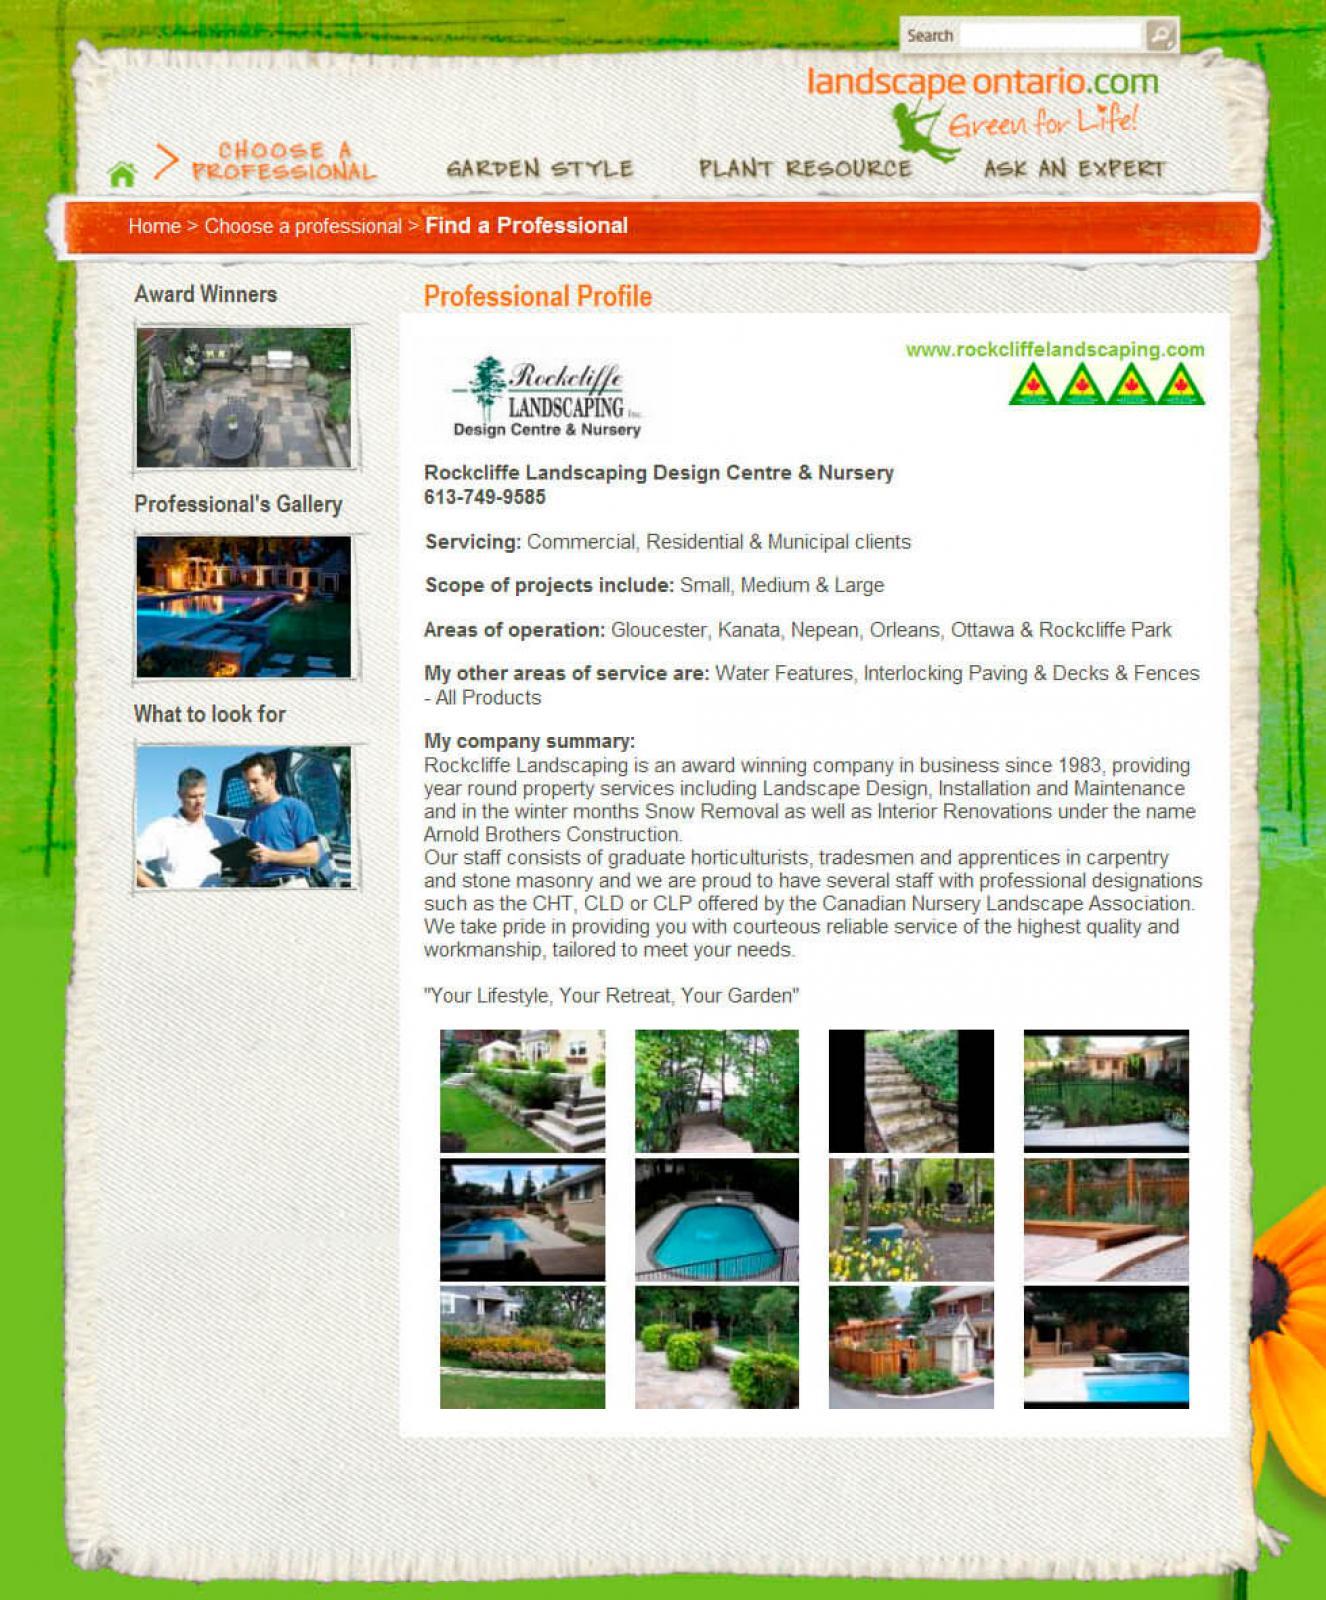 An example of how one member’s page looks on landscapeontario.com, a benifit of membership.